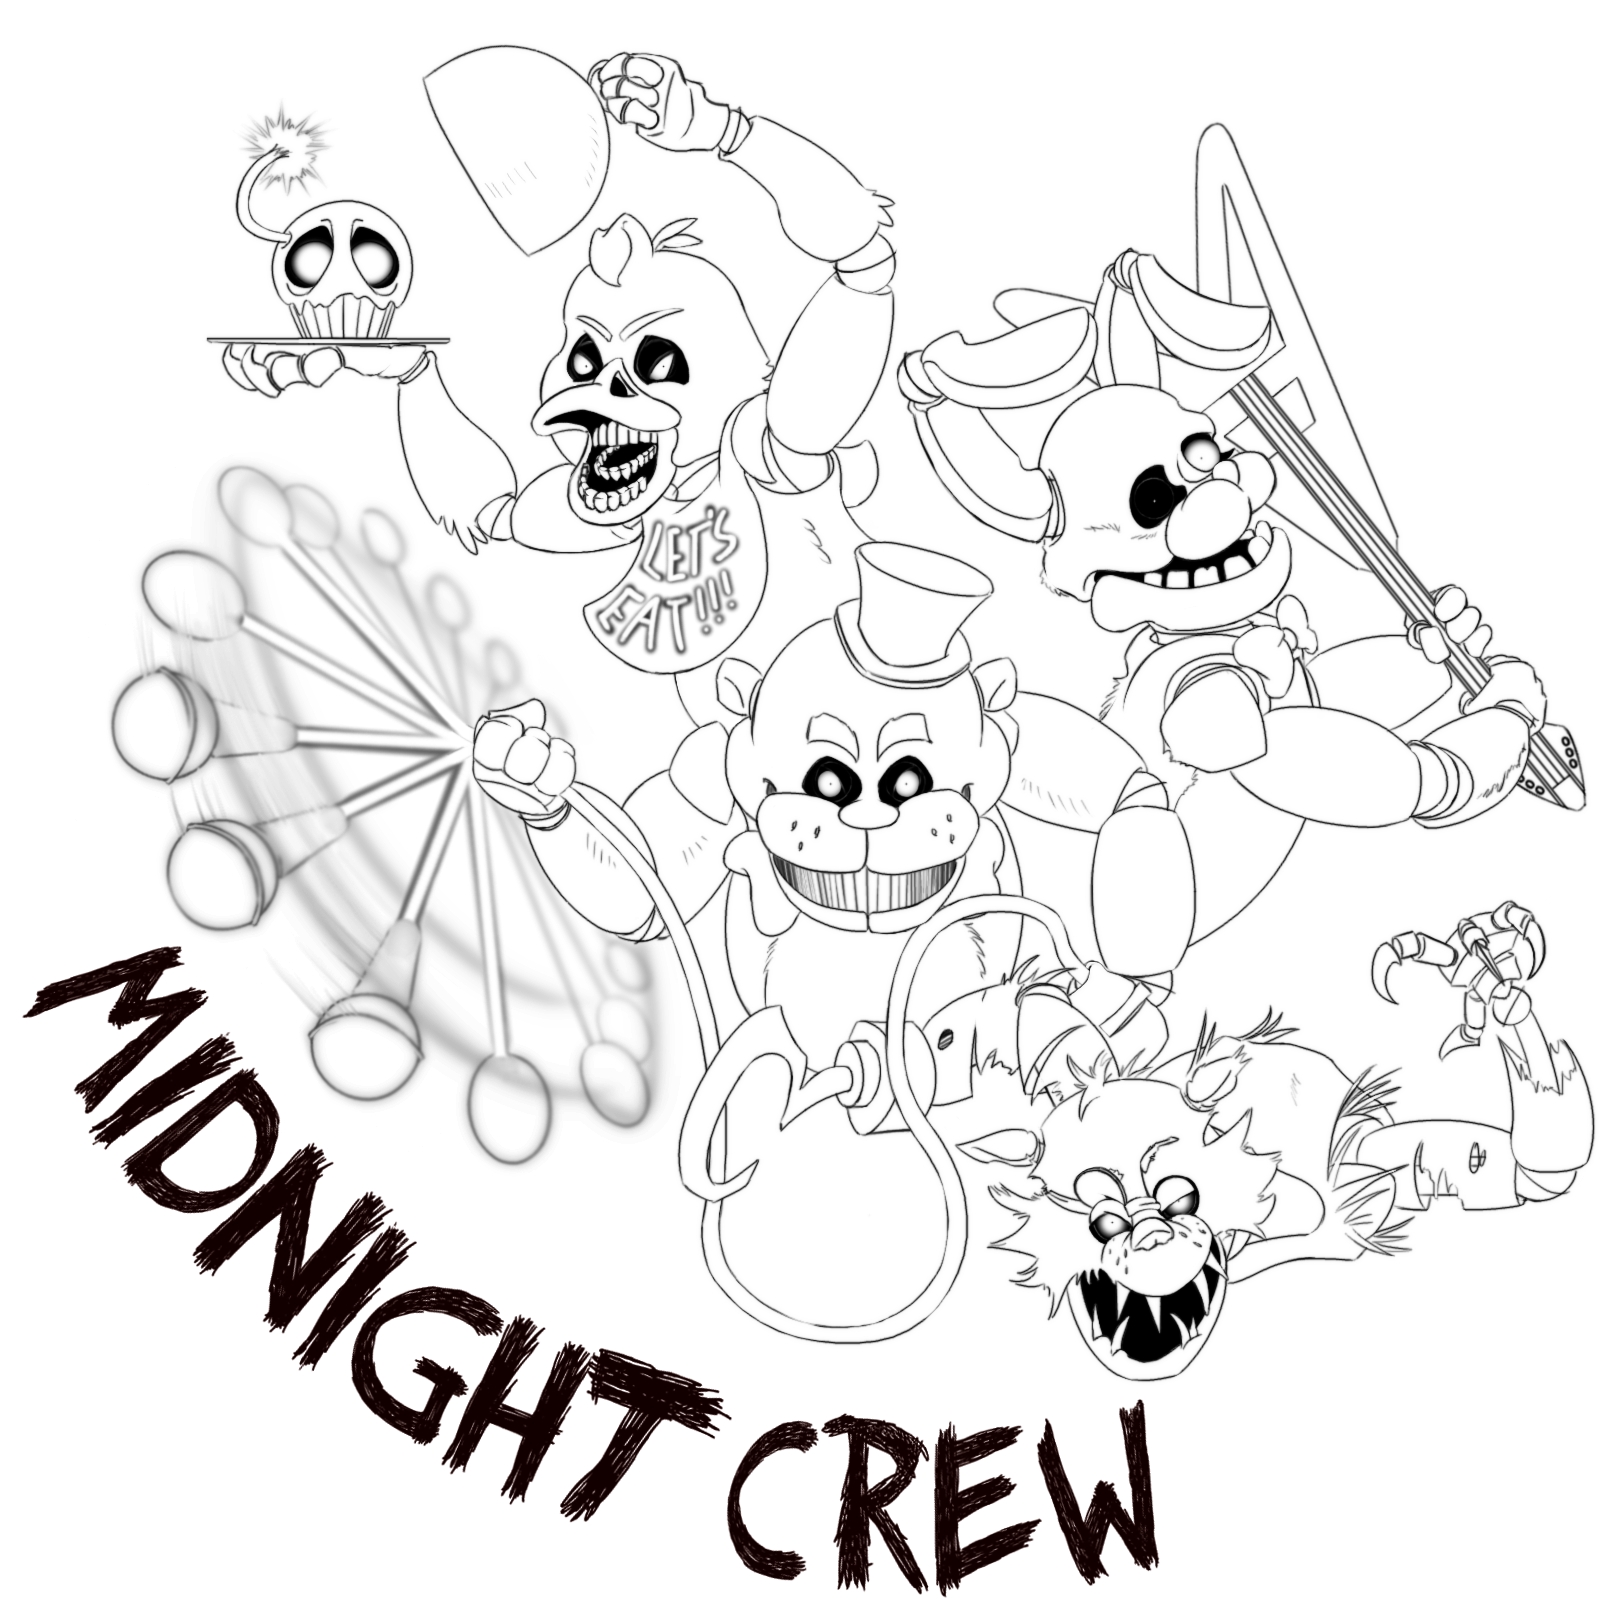 Freddy Fazbear Coloring Page At Getdrawings Free Download